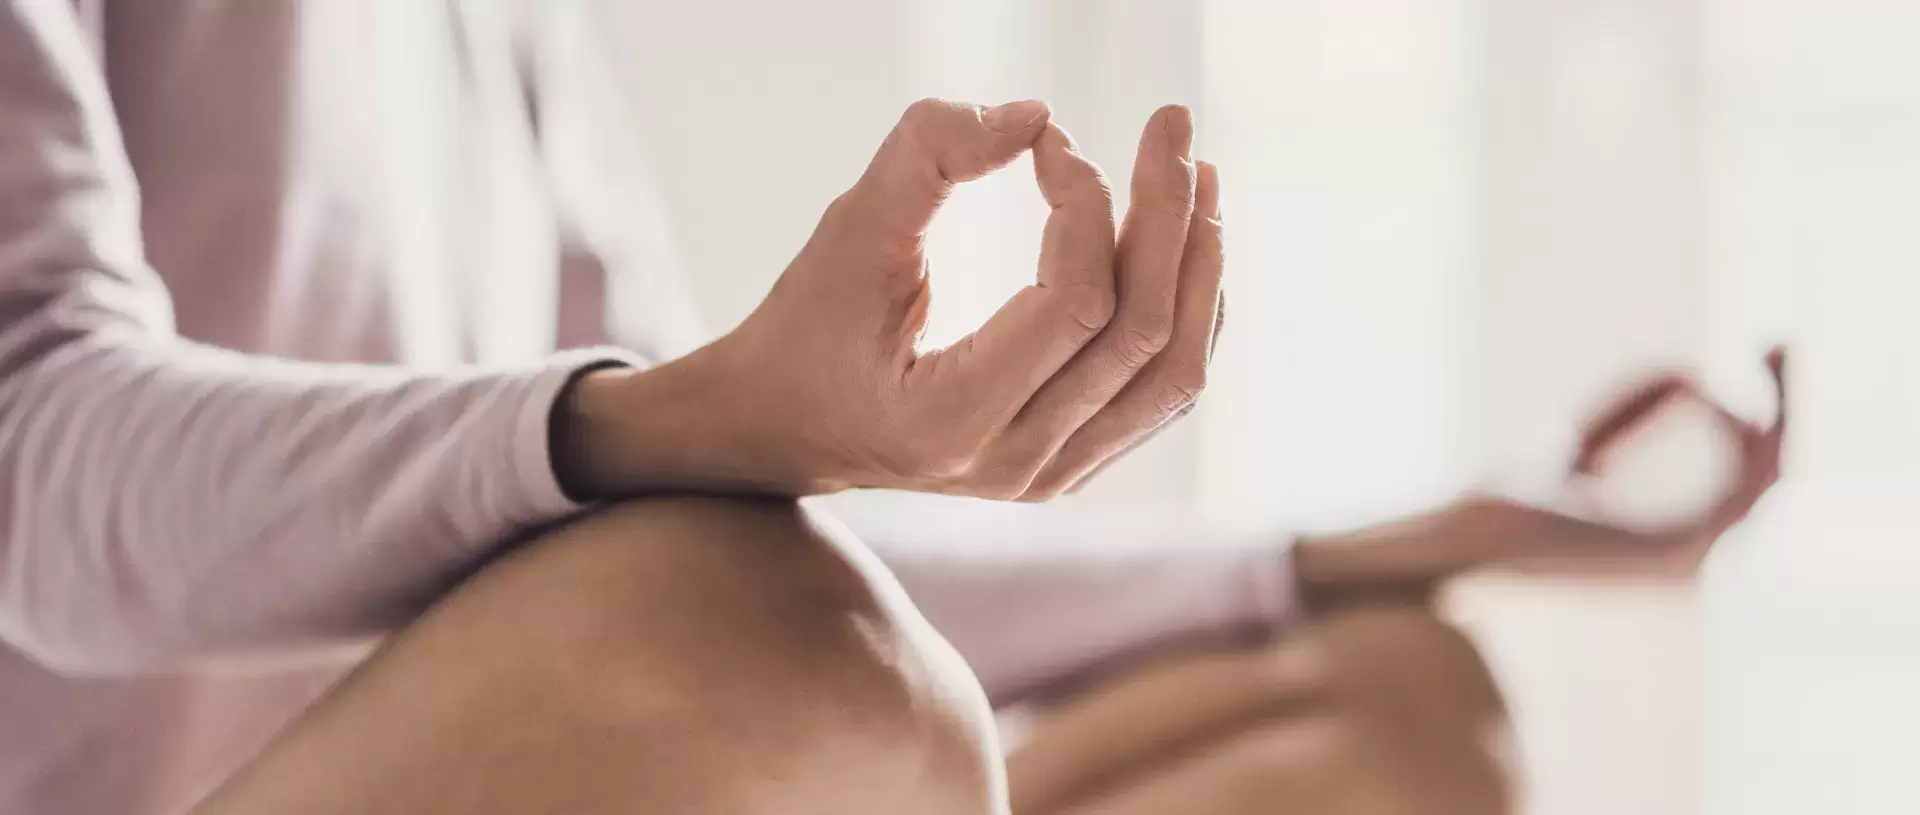 Yoga and Rolfing go very much hand in hand